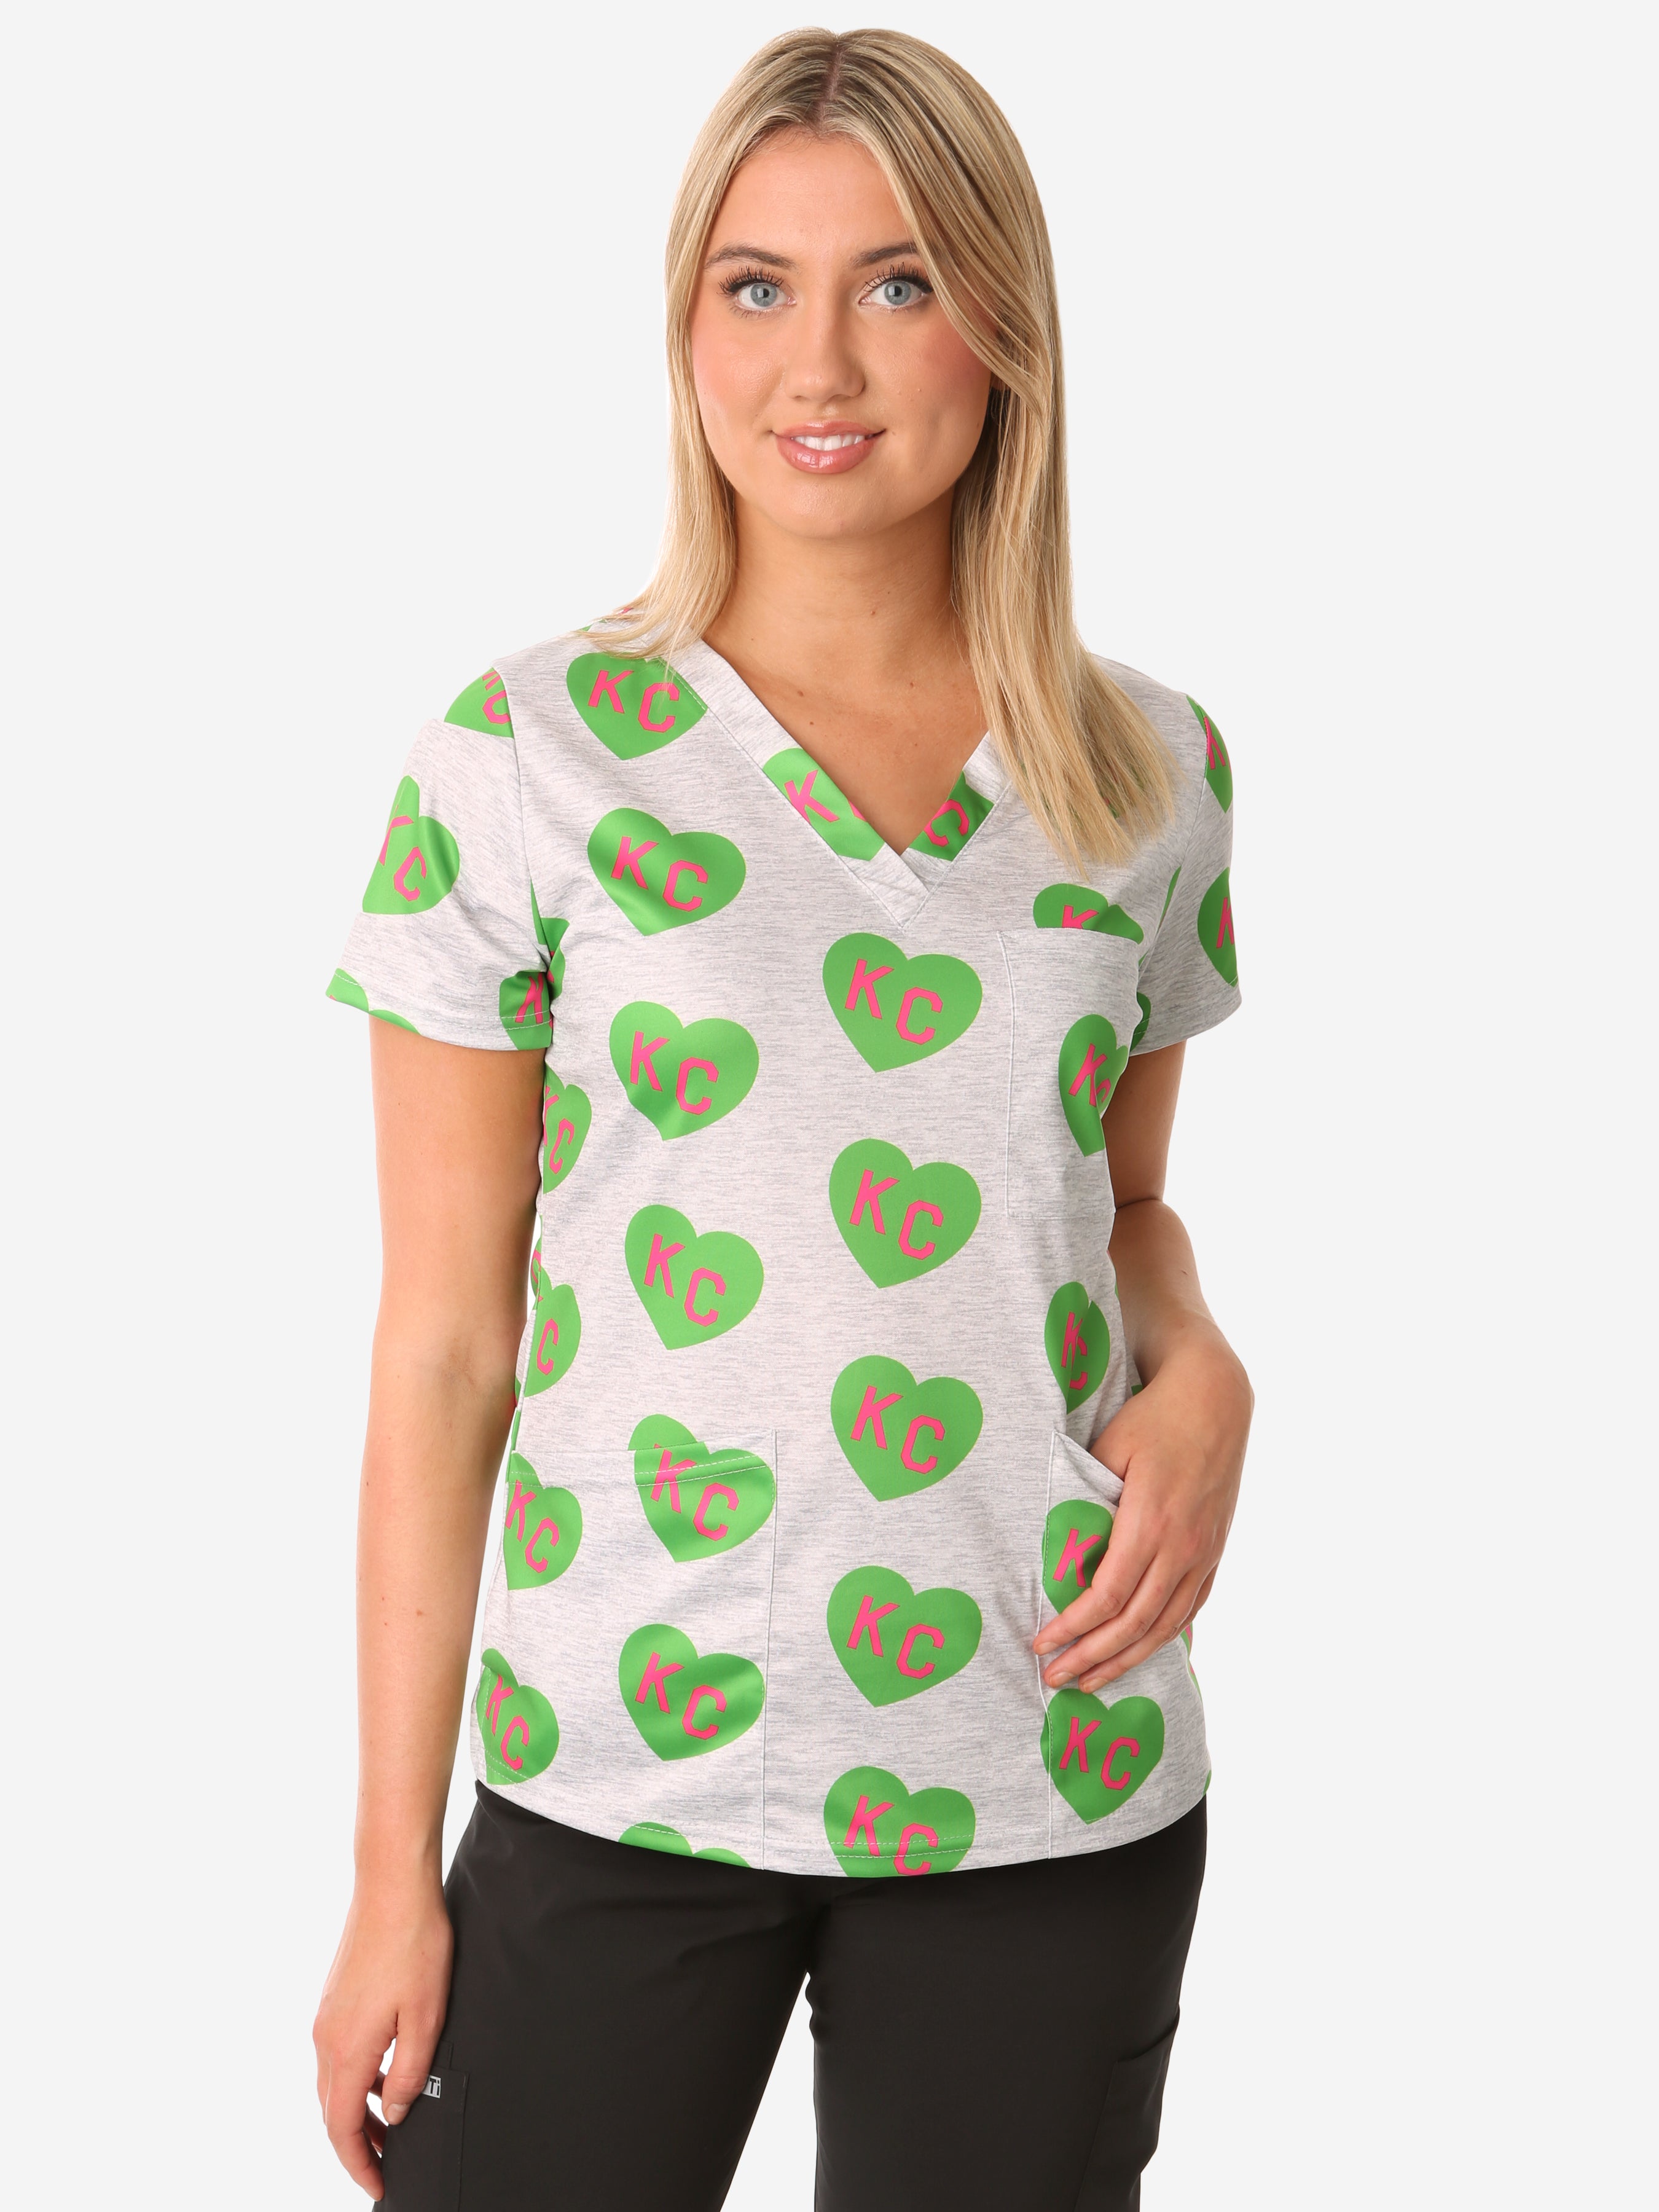 Women&#39;s Charlie Hustle All-Over KC Heart Scrub Top Three Pocket Green and Pink Front View Top Only